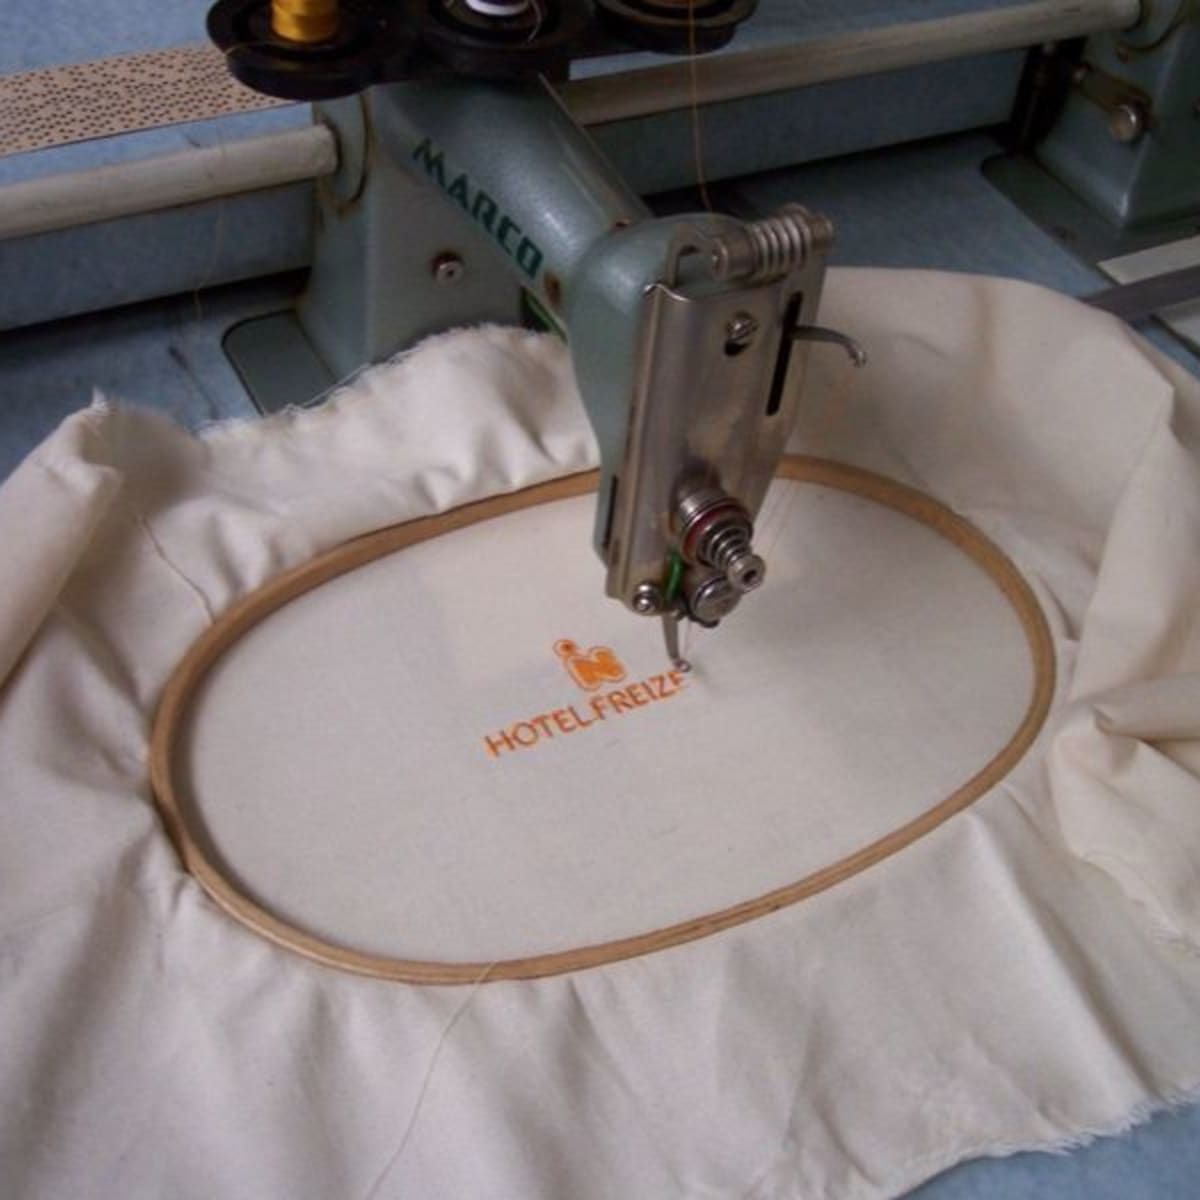 5 Tips for Embroidery Sewing Using a Regular Sewing Machine